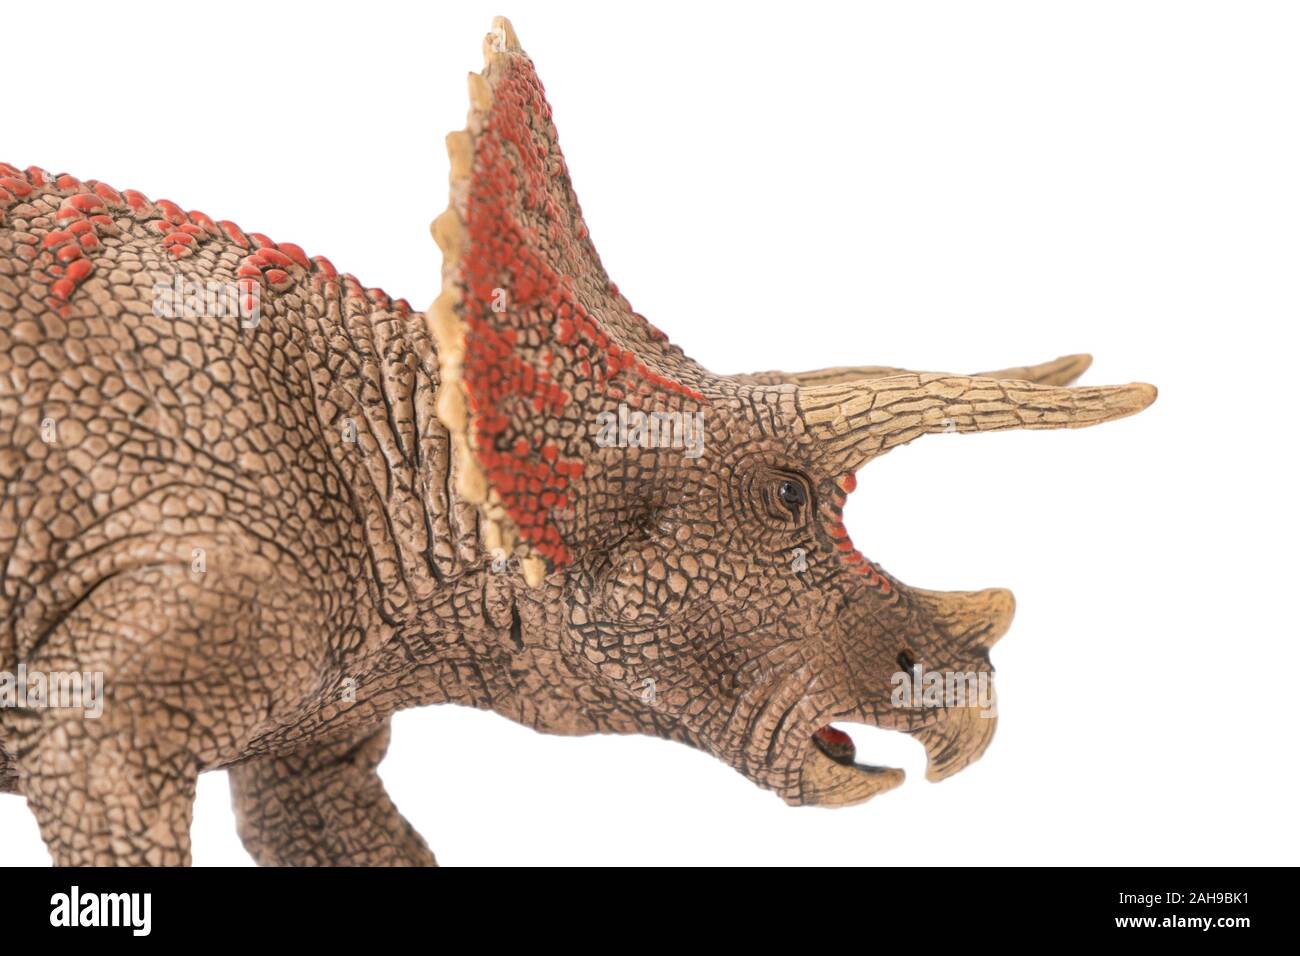 Triceratops isolated on white background. Lateral view. Triceratops is an herbivore dinosaur with three horns lived in cretaceous era. Image ideal for Stock Photo